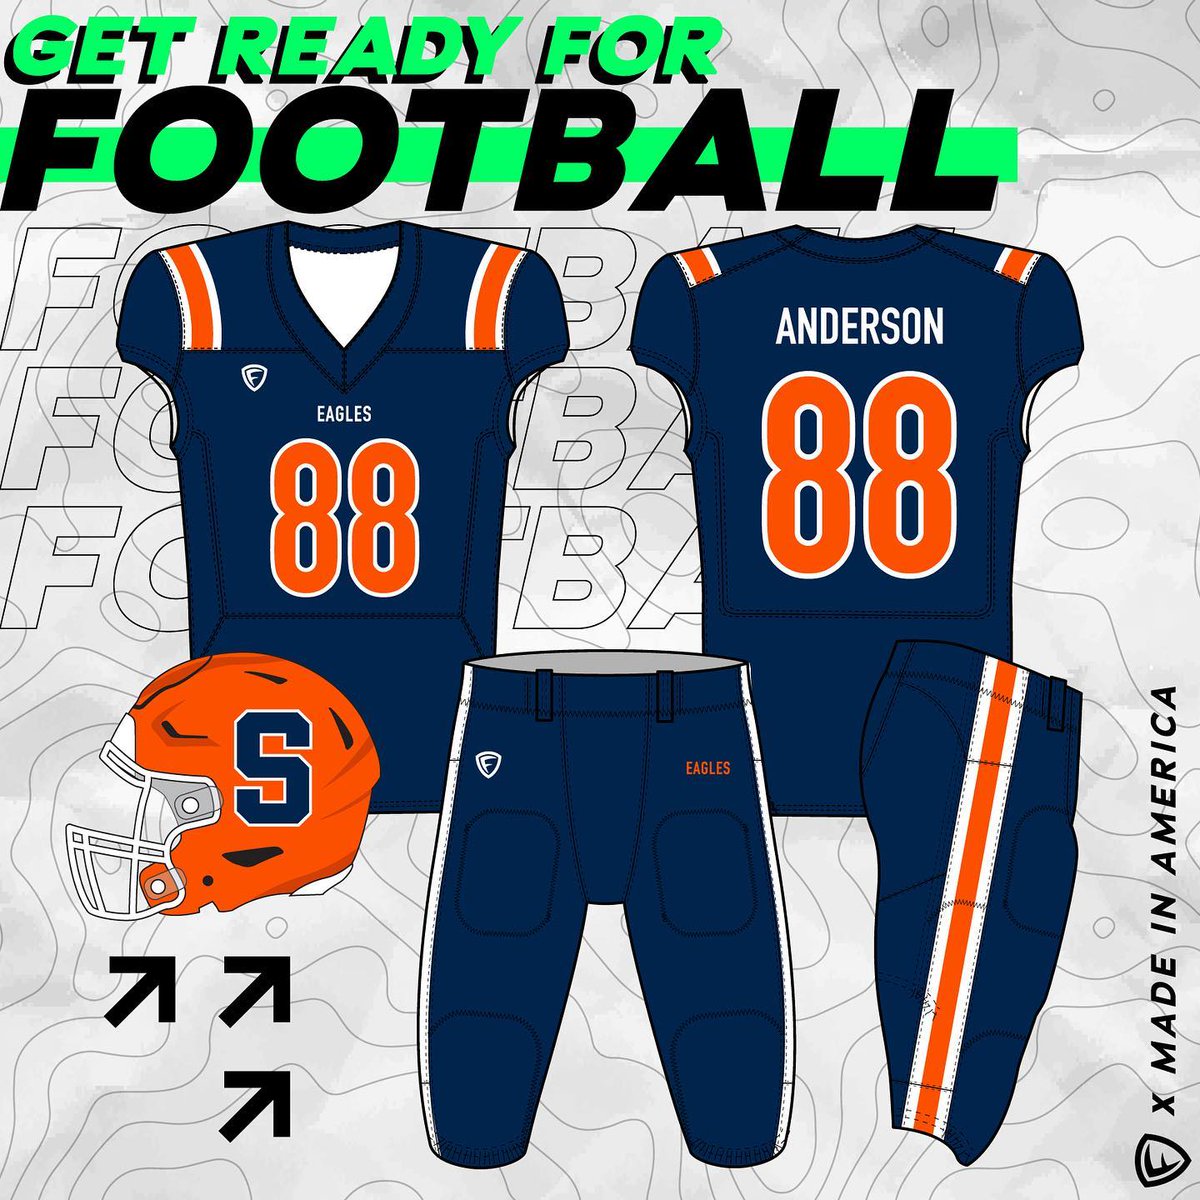 Who’s getting ready for #fridaynightlights Fourg has you covered with our American made custom uniforms and decals, online stores and coaches gear. Reach out to get your team prepared for the season.